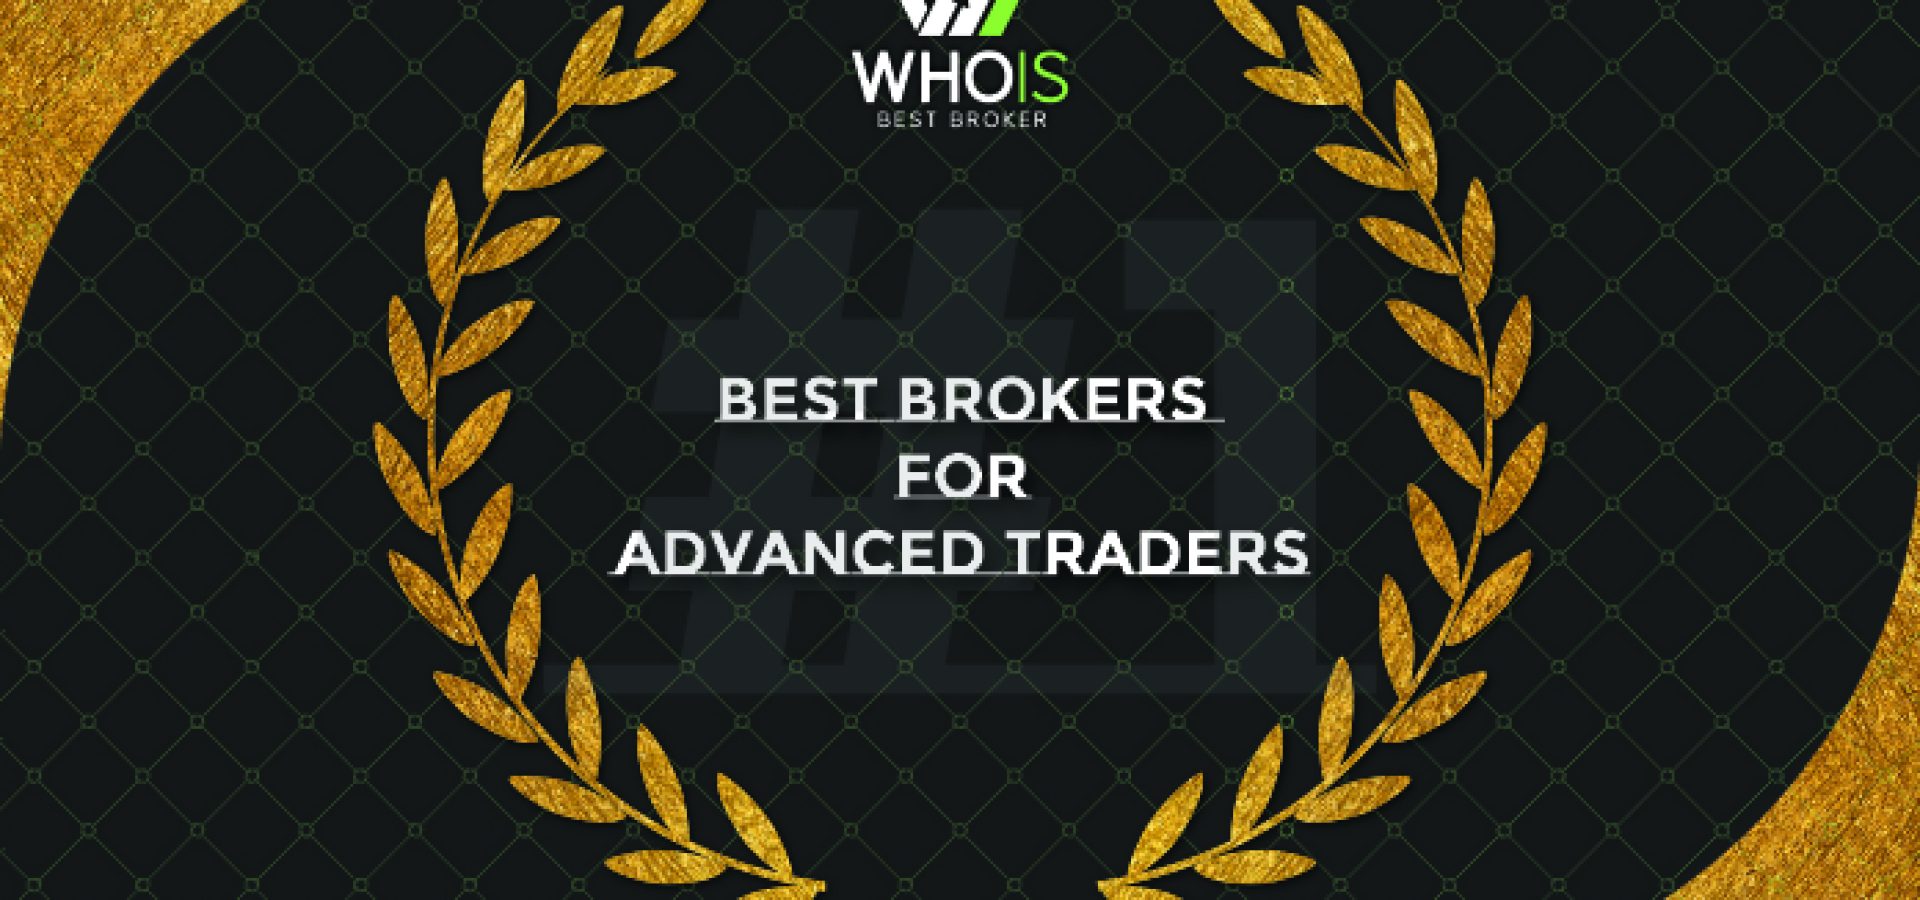 Besto brokers for advanced traders